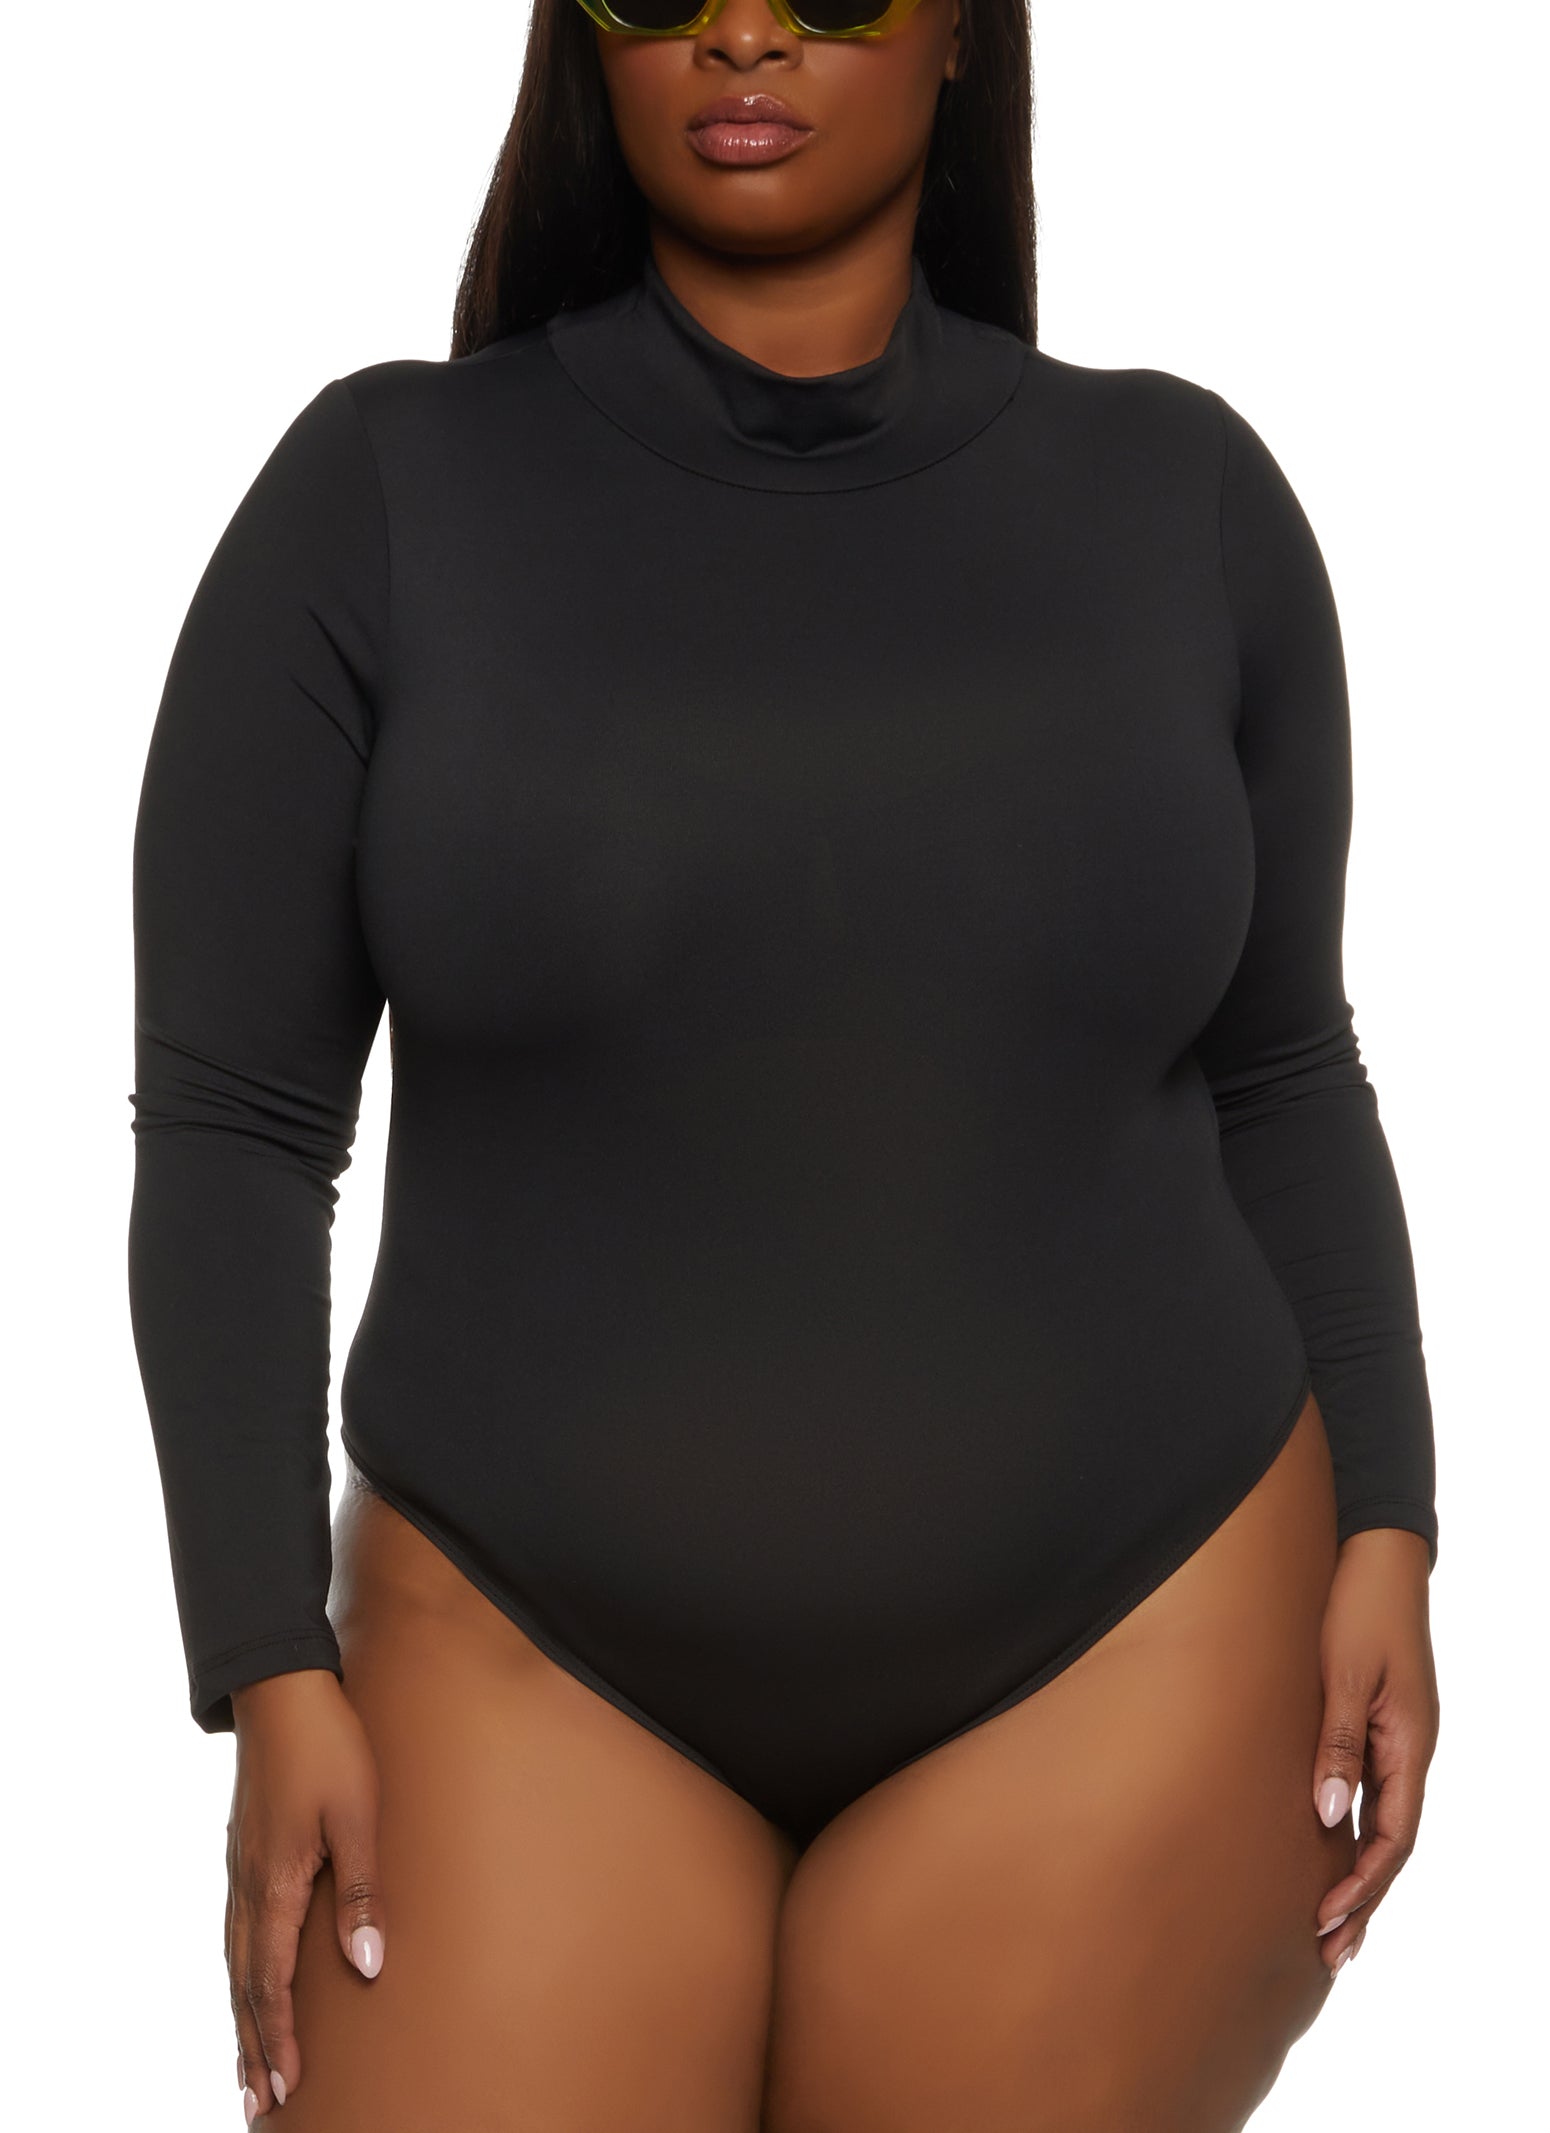 Women's Bodysuits - Strapless, Lace & Long Sleeve Bodysuits - Express